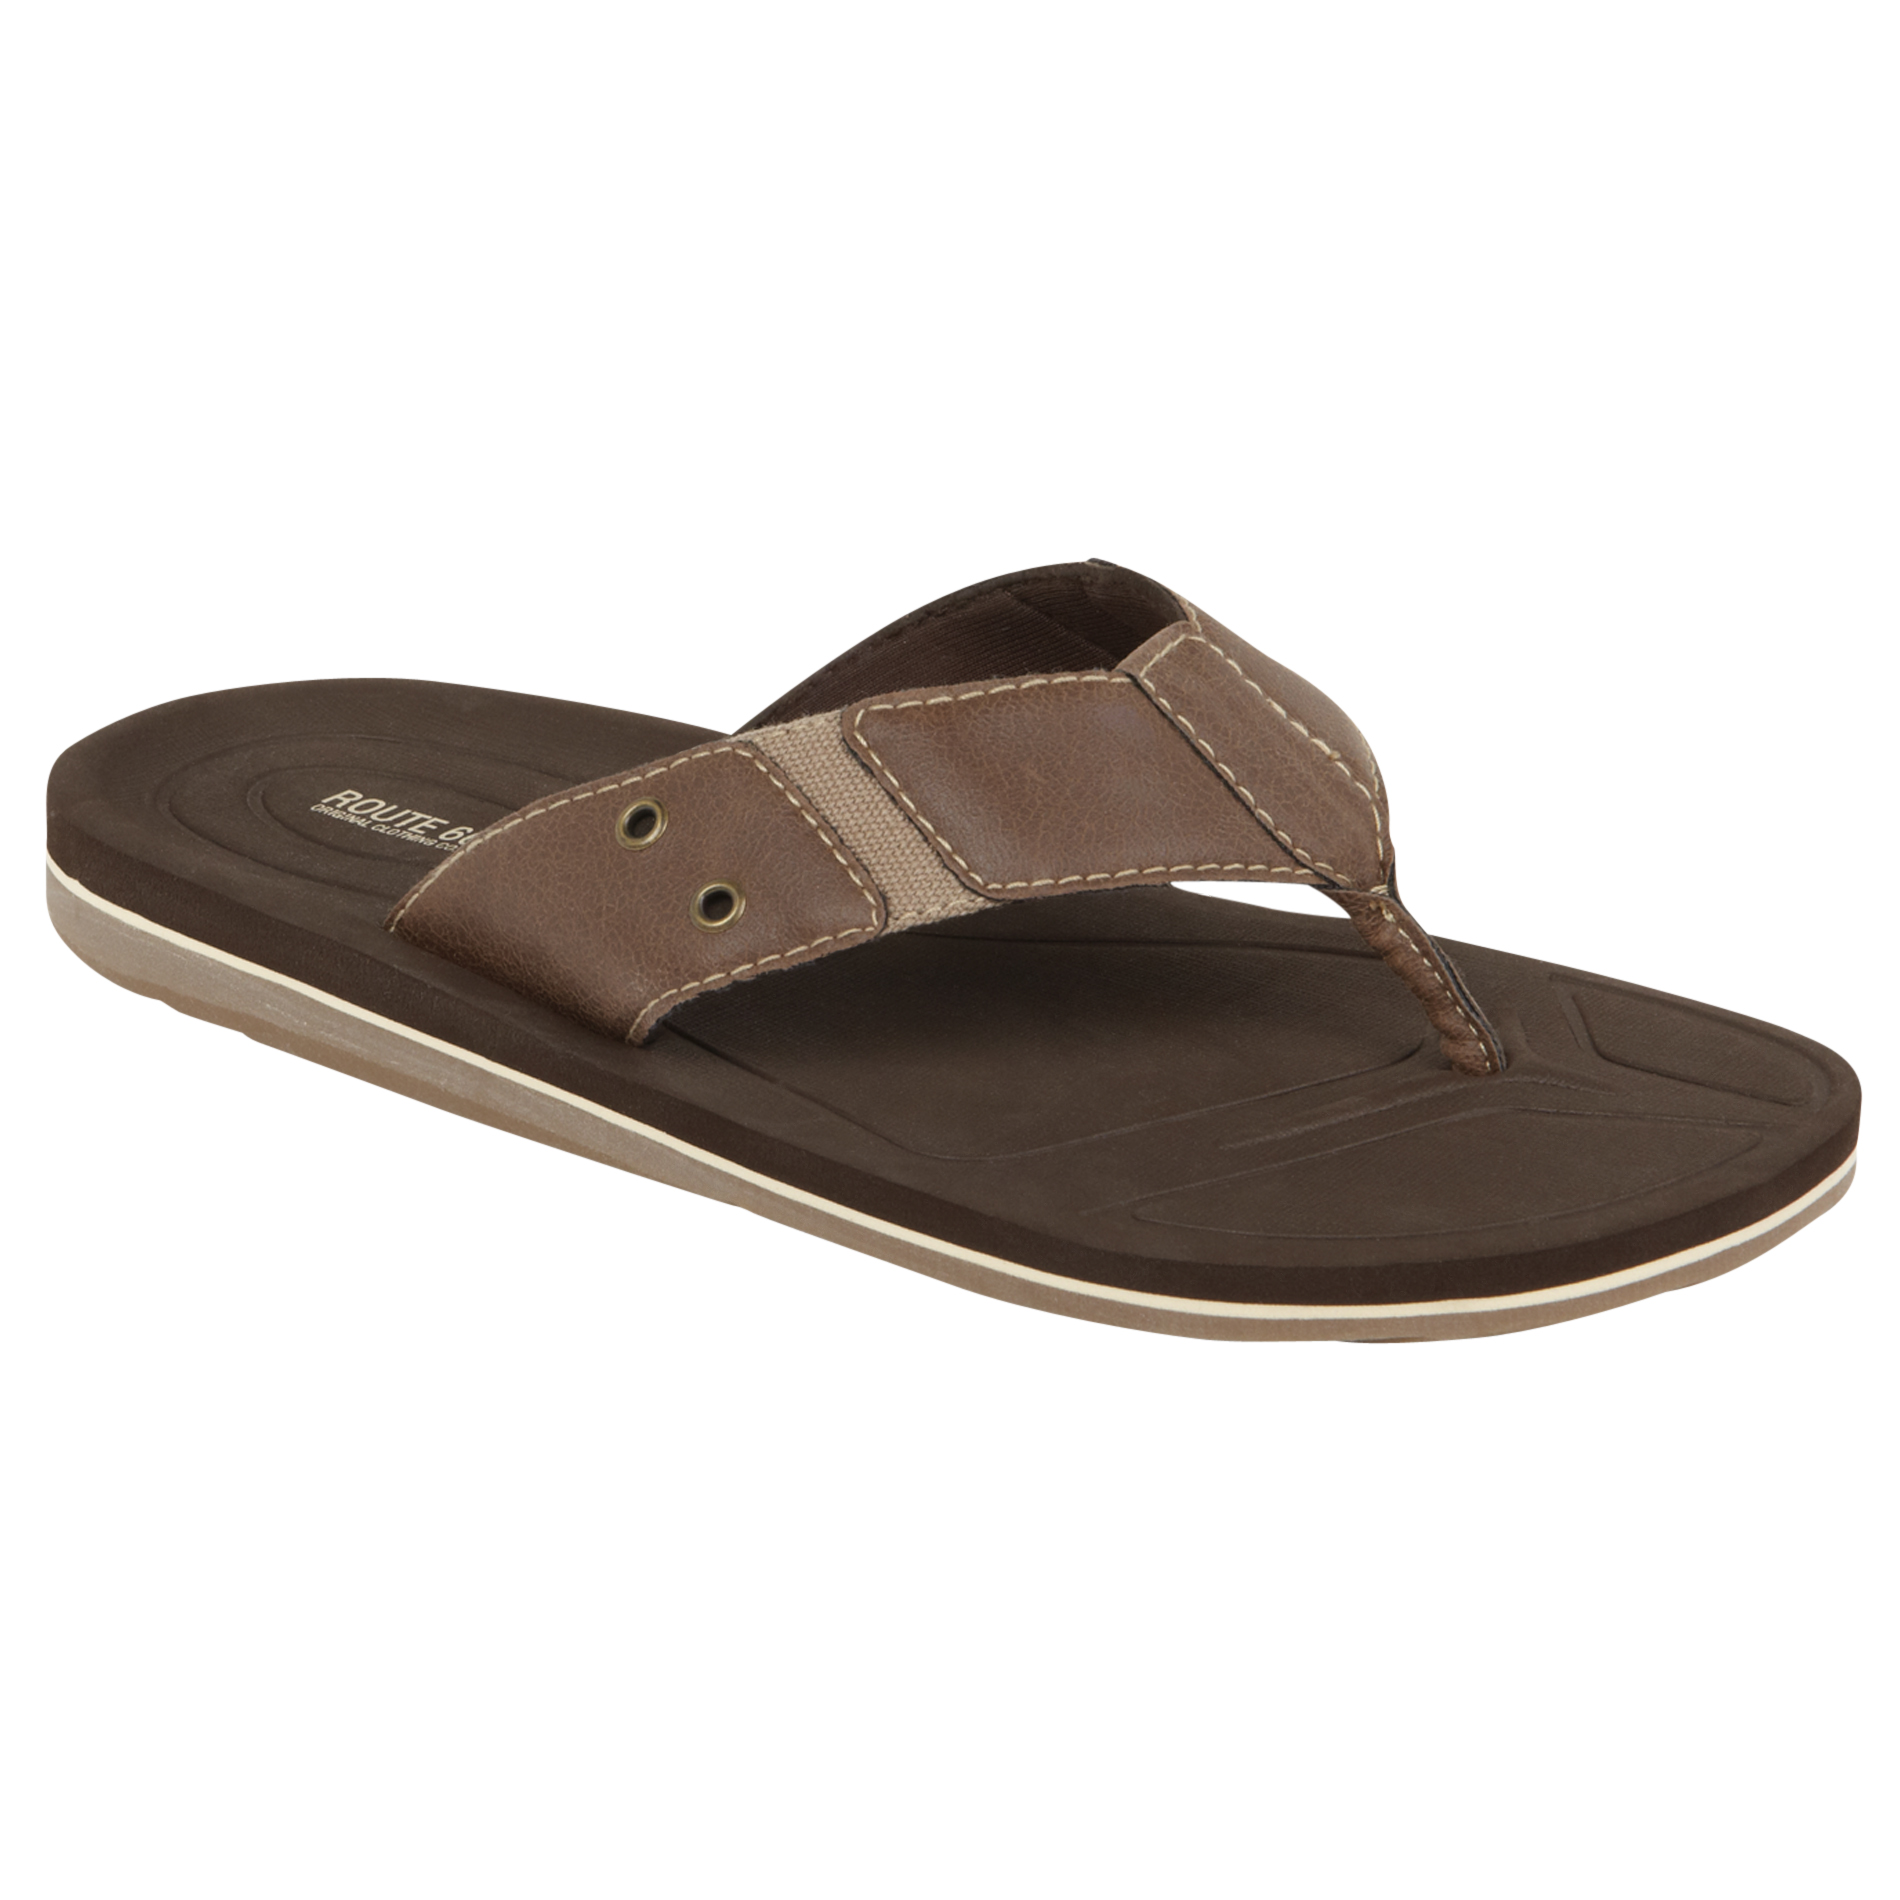 Route 66 Men's Sandal Milly2 - Brown